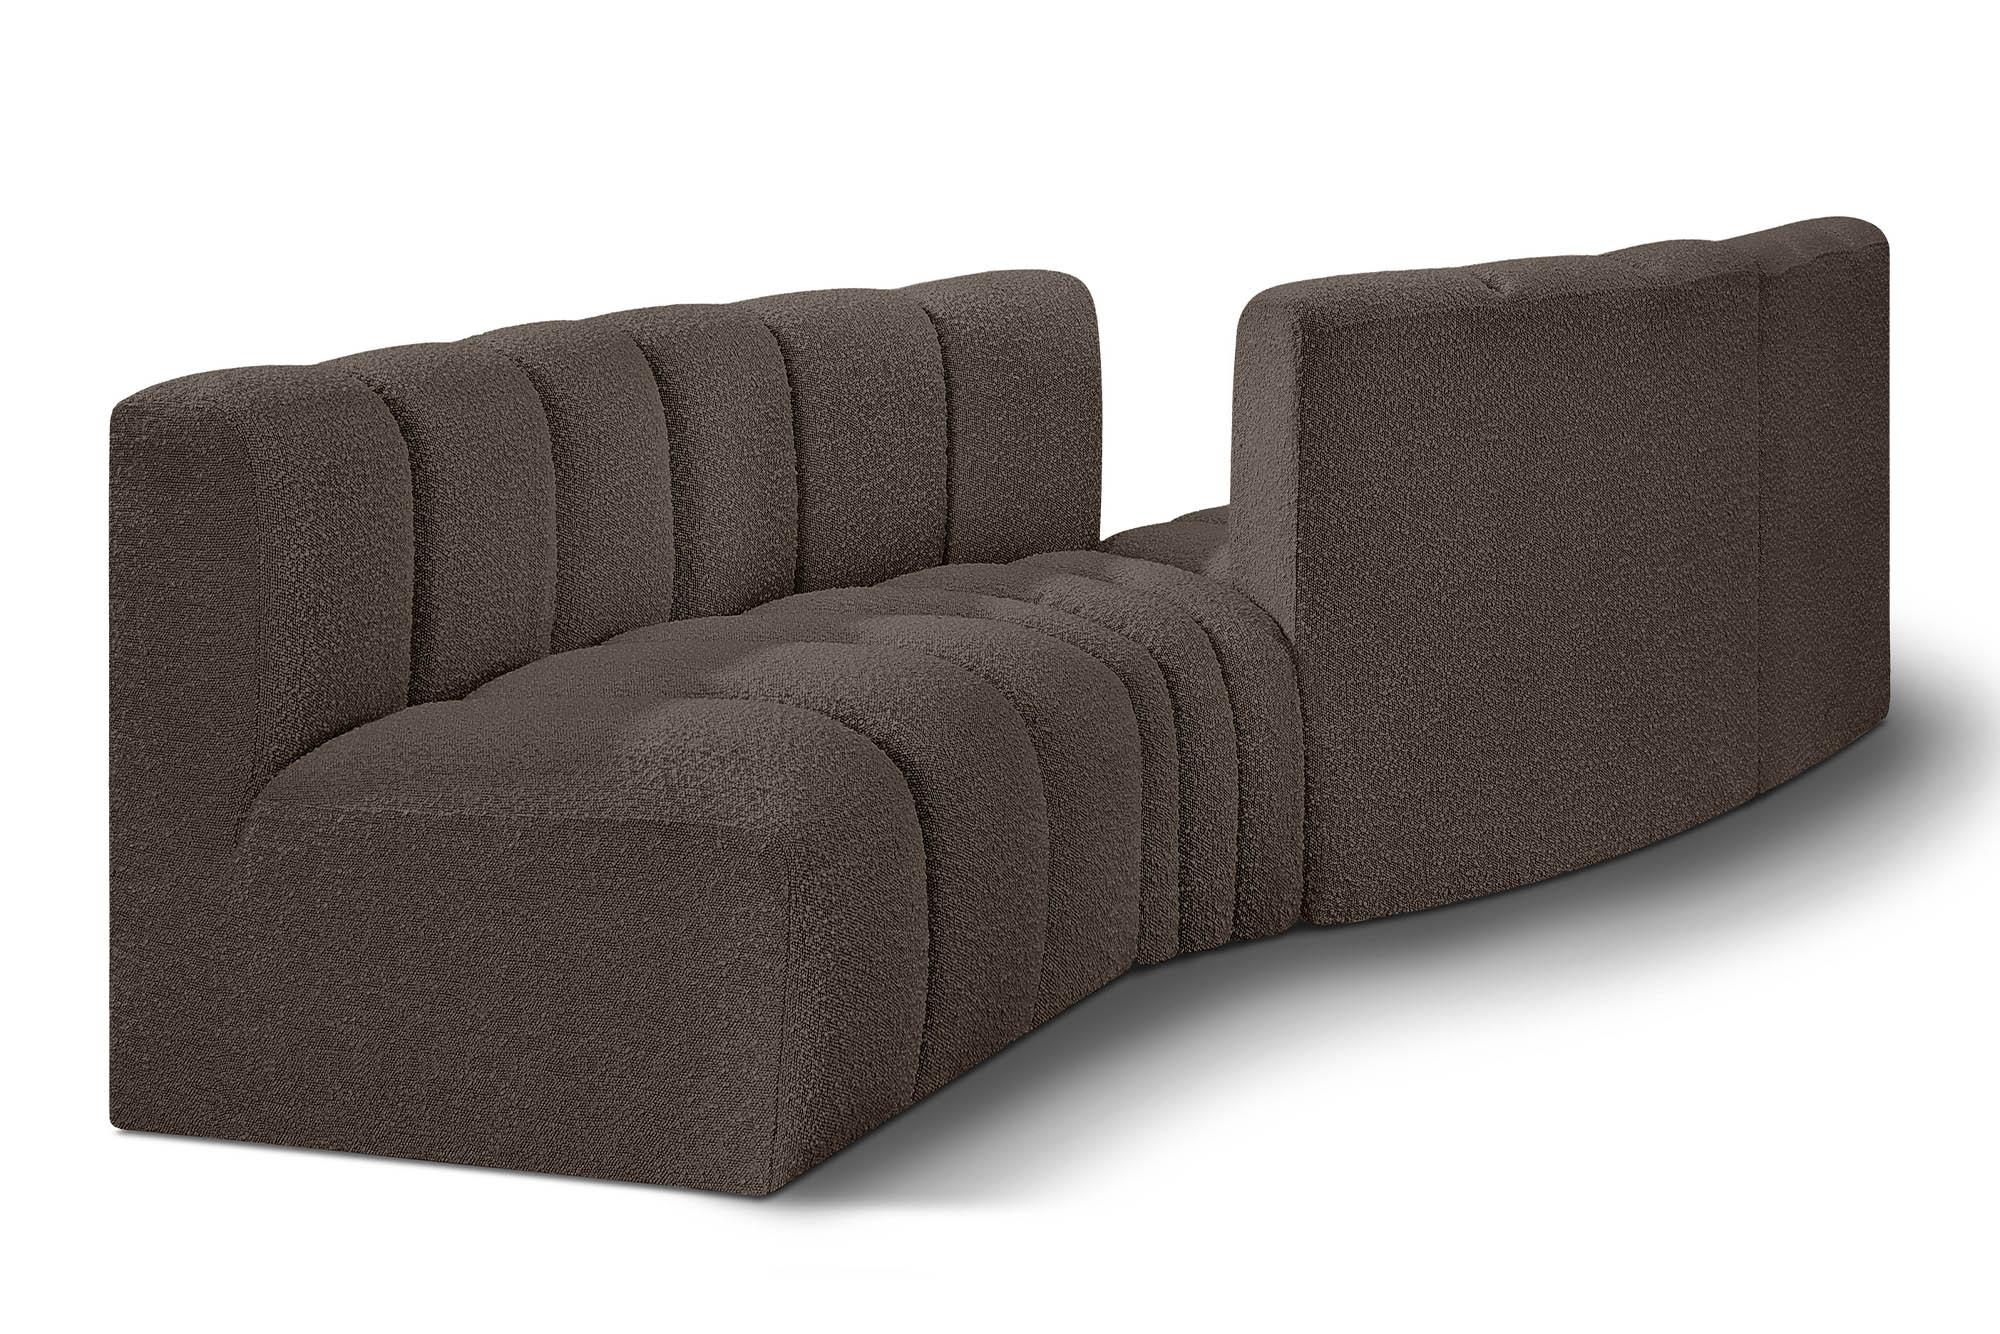 Contemporary, Modern Modular Sectional Sofa ARC 102Brown-S4A 102Brown-S4A in Brown 